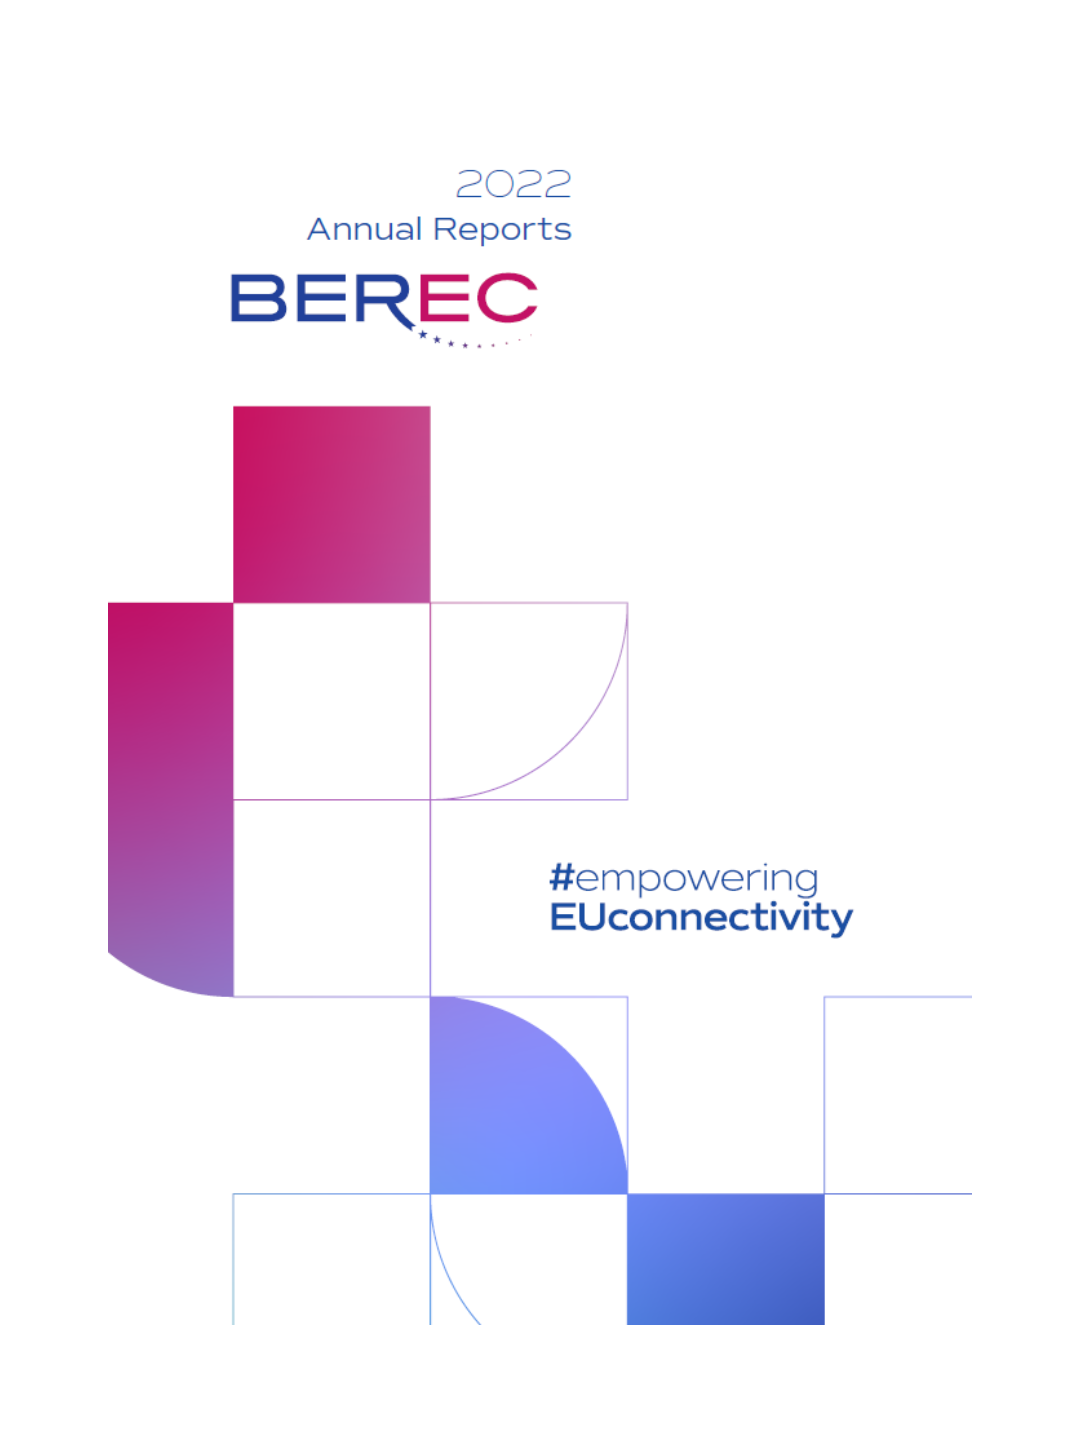 Cover of the BEREC Annual Reports 2022